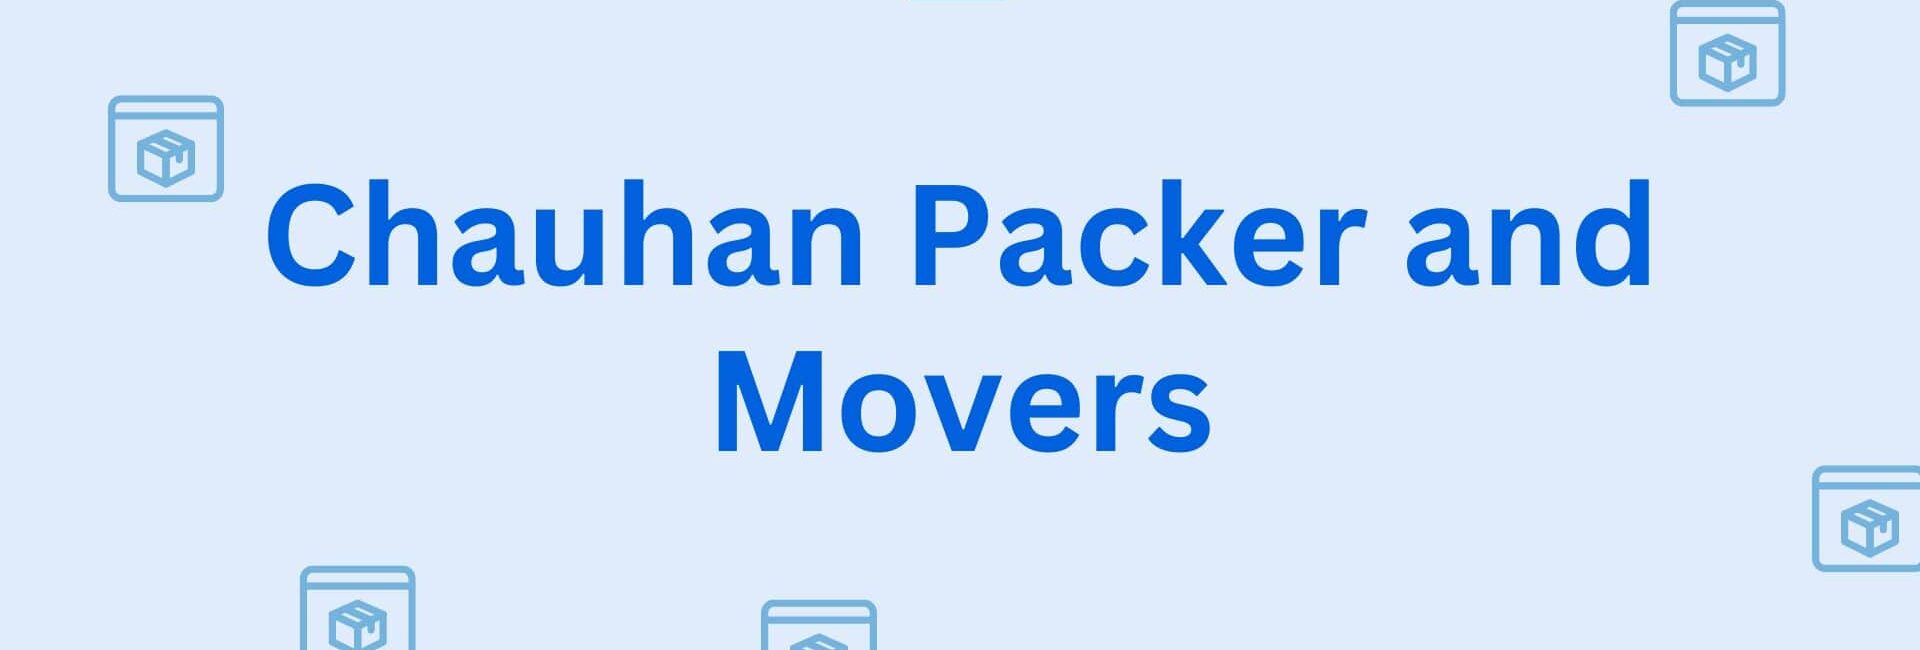 Chauhan Packer and Movers - Mover and Packers in Hisar